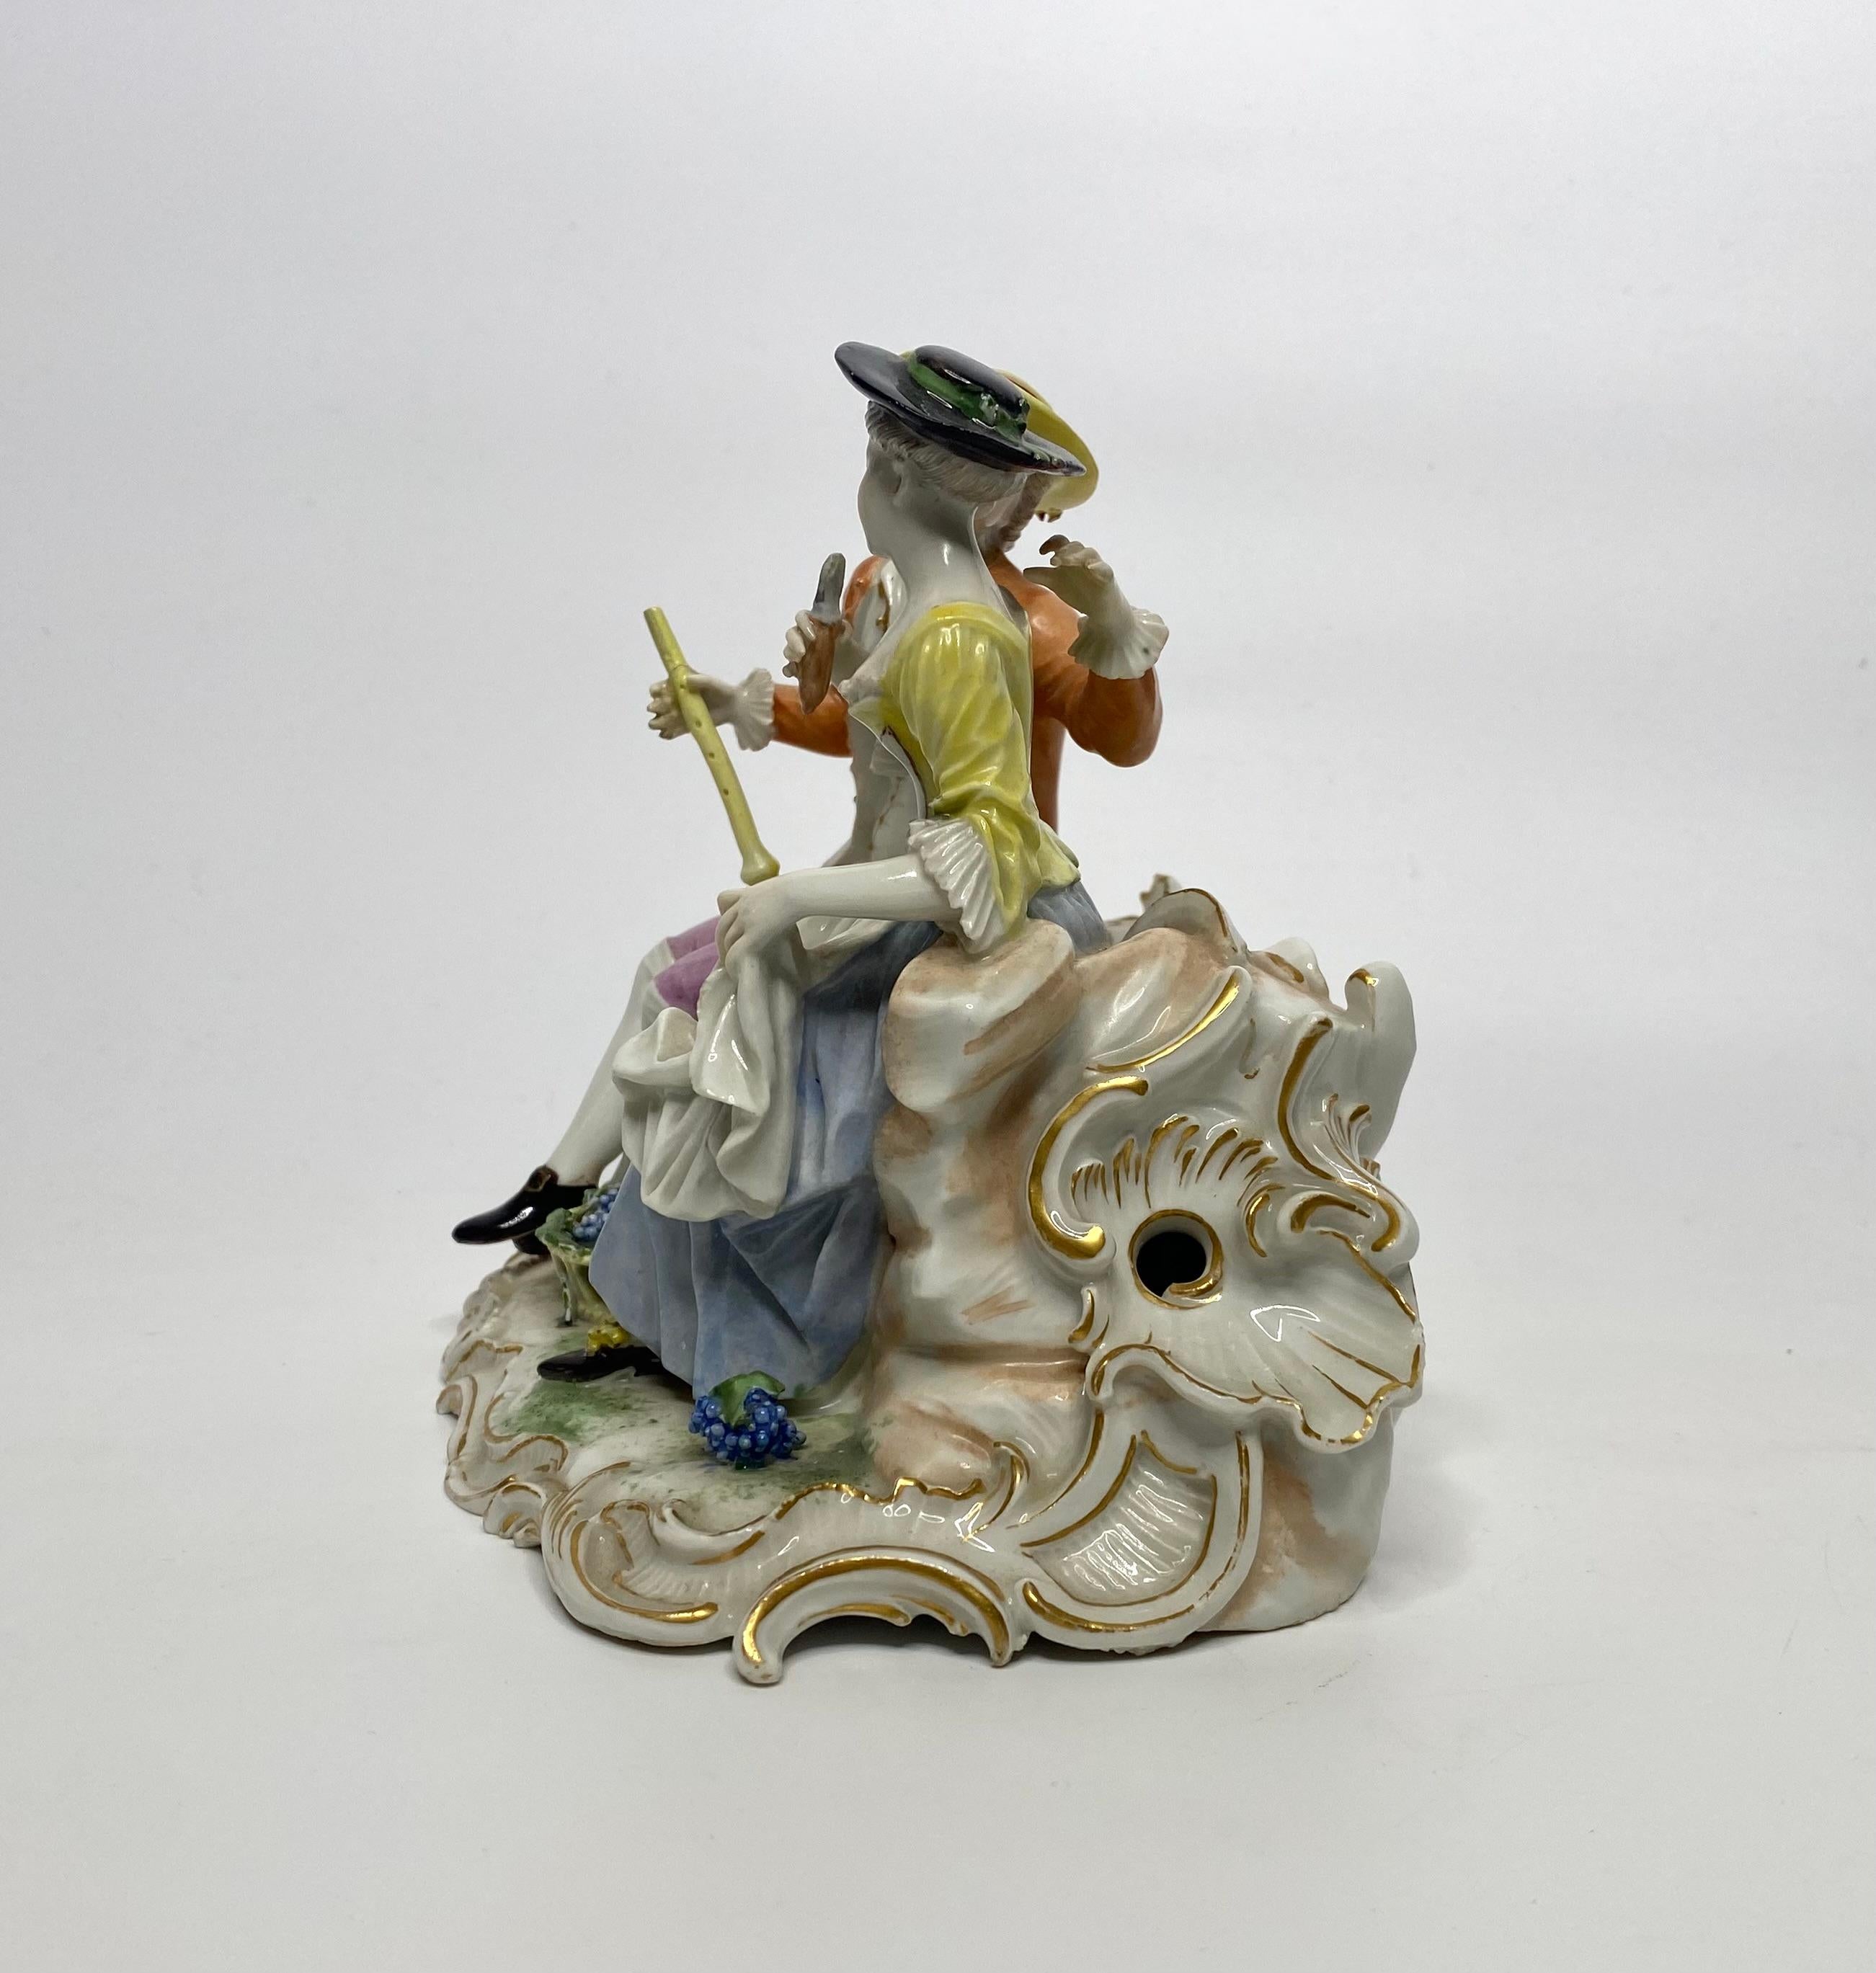 Ludwigsburg porcelain group, modelled by Johann Christoph Haselmeyer, c. 1770. A courting couple, dressed in 18th Century costume, seated upon rocks, before an elaborate rococo scroll architectural feature, edged in gilt.
The boy holds a pipe,